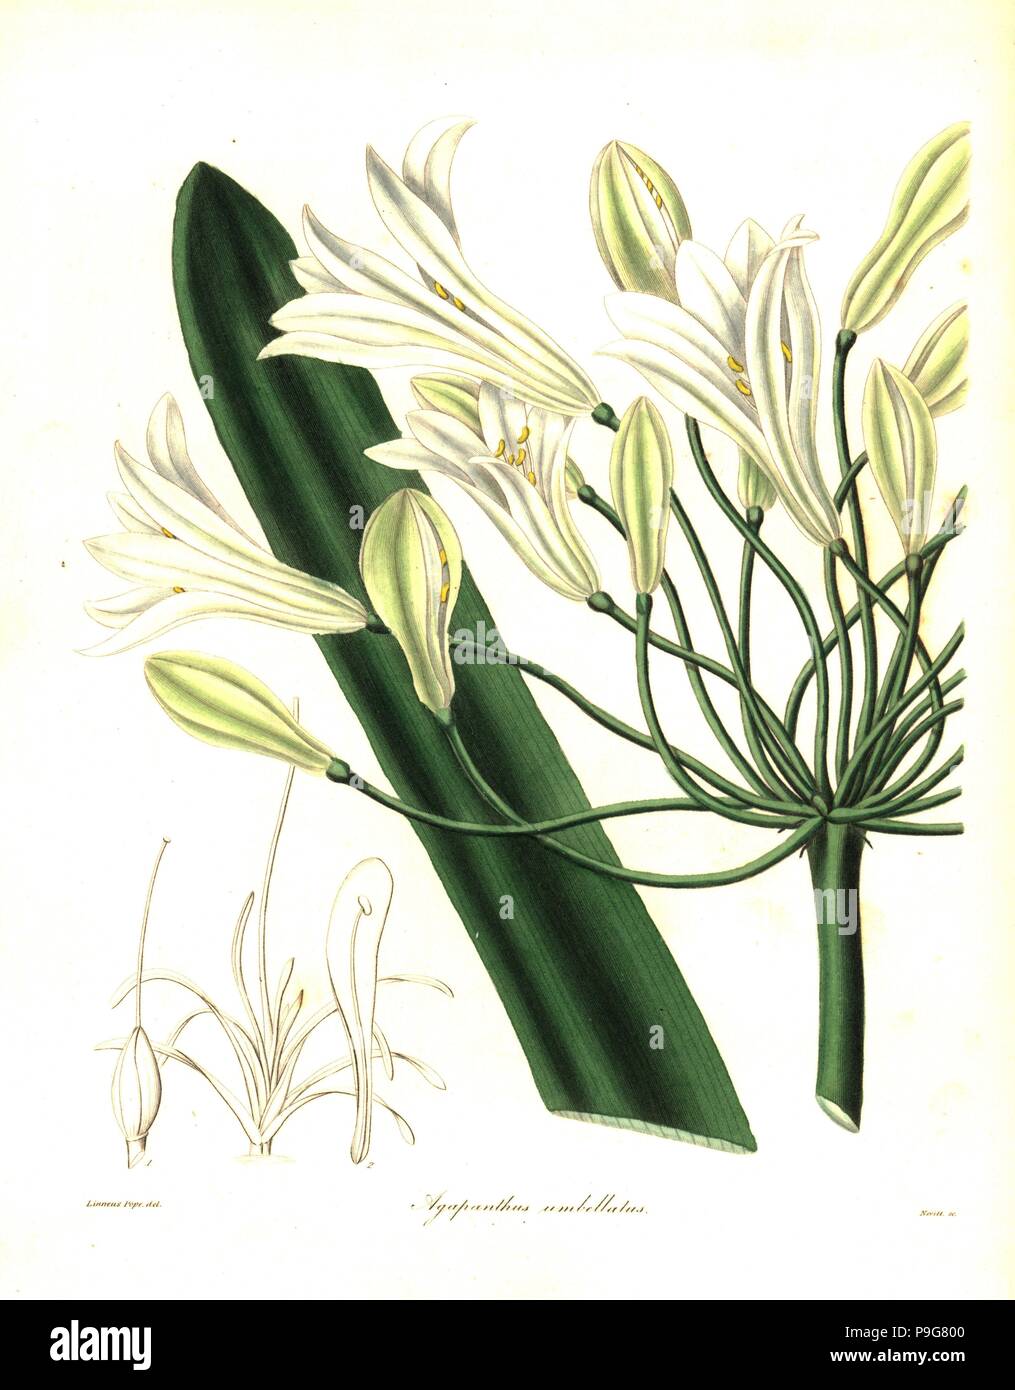 African lily, Agapanthus africanus (white-flowered agapanthus, Agapanthus umbellatus). Handcoloured copperplate engraving by S. Nevitt after a botanical illustration by Linneus Pope from Benjamin Maund and the Rev. John Stevens Henslow's The Botanist, London, 1836. Stock Photo